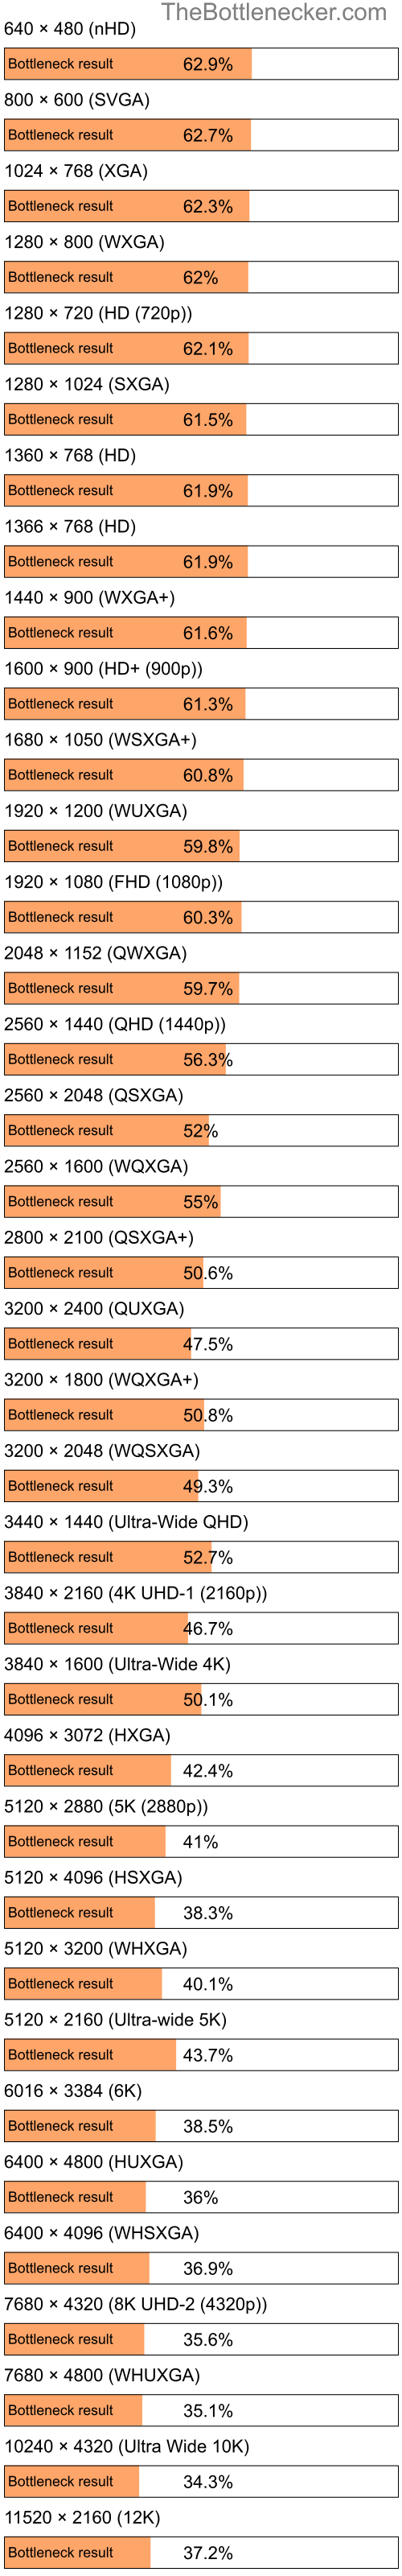 Bottleneck results by resolution for Intel Core i5-3470 and NVIDIA GeForce RTX 3060 in Processor Intense Tasks